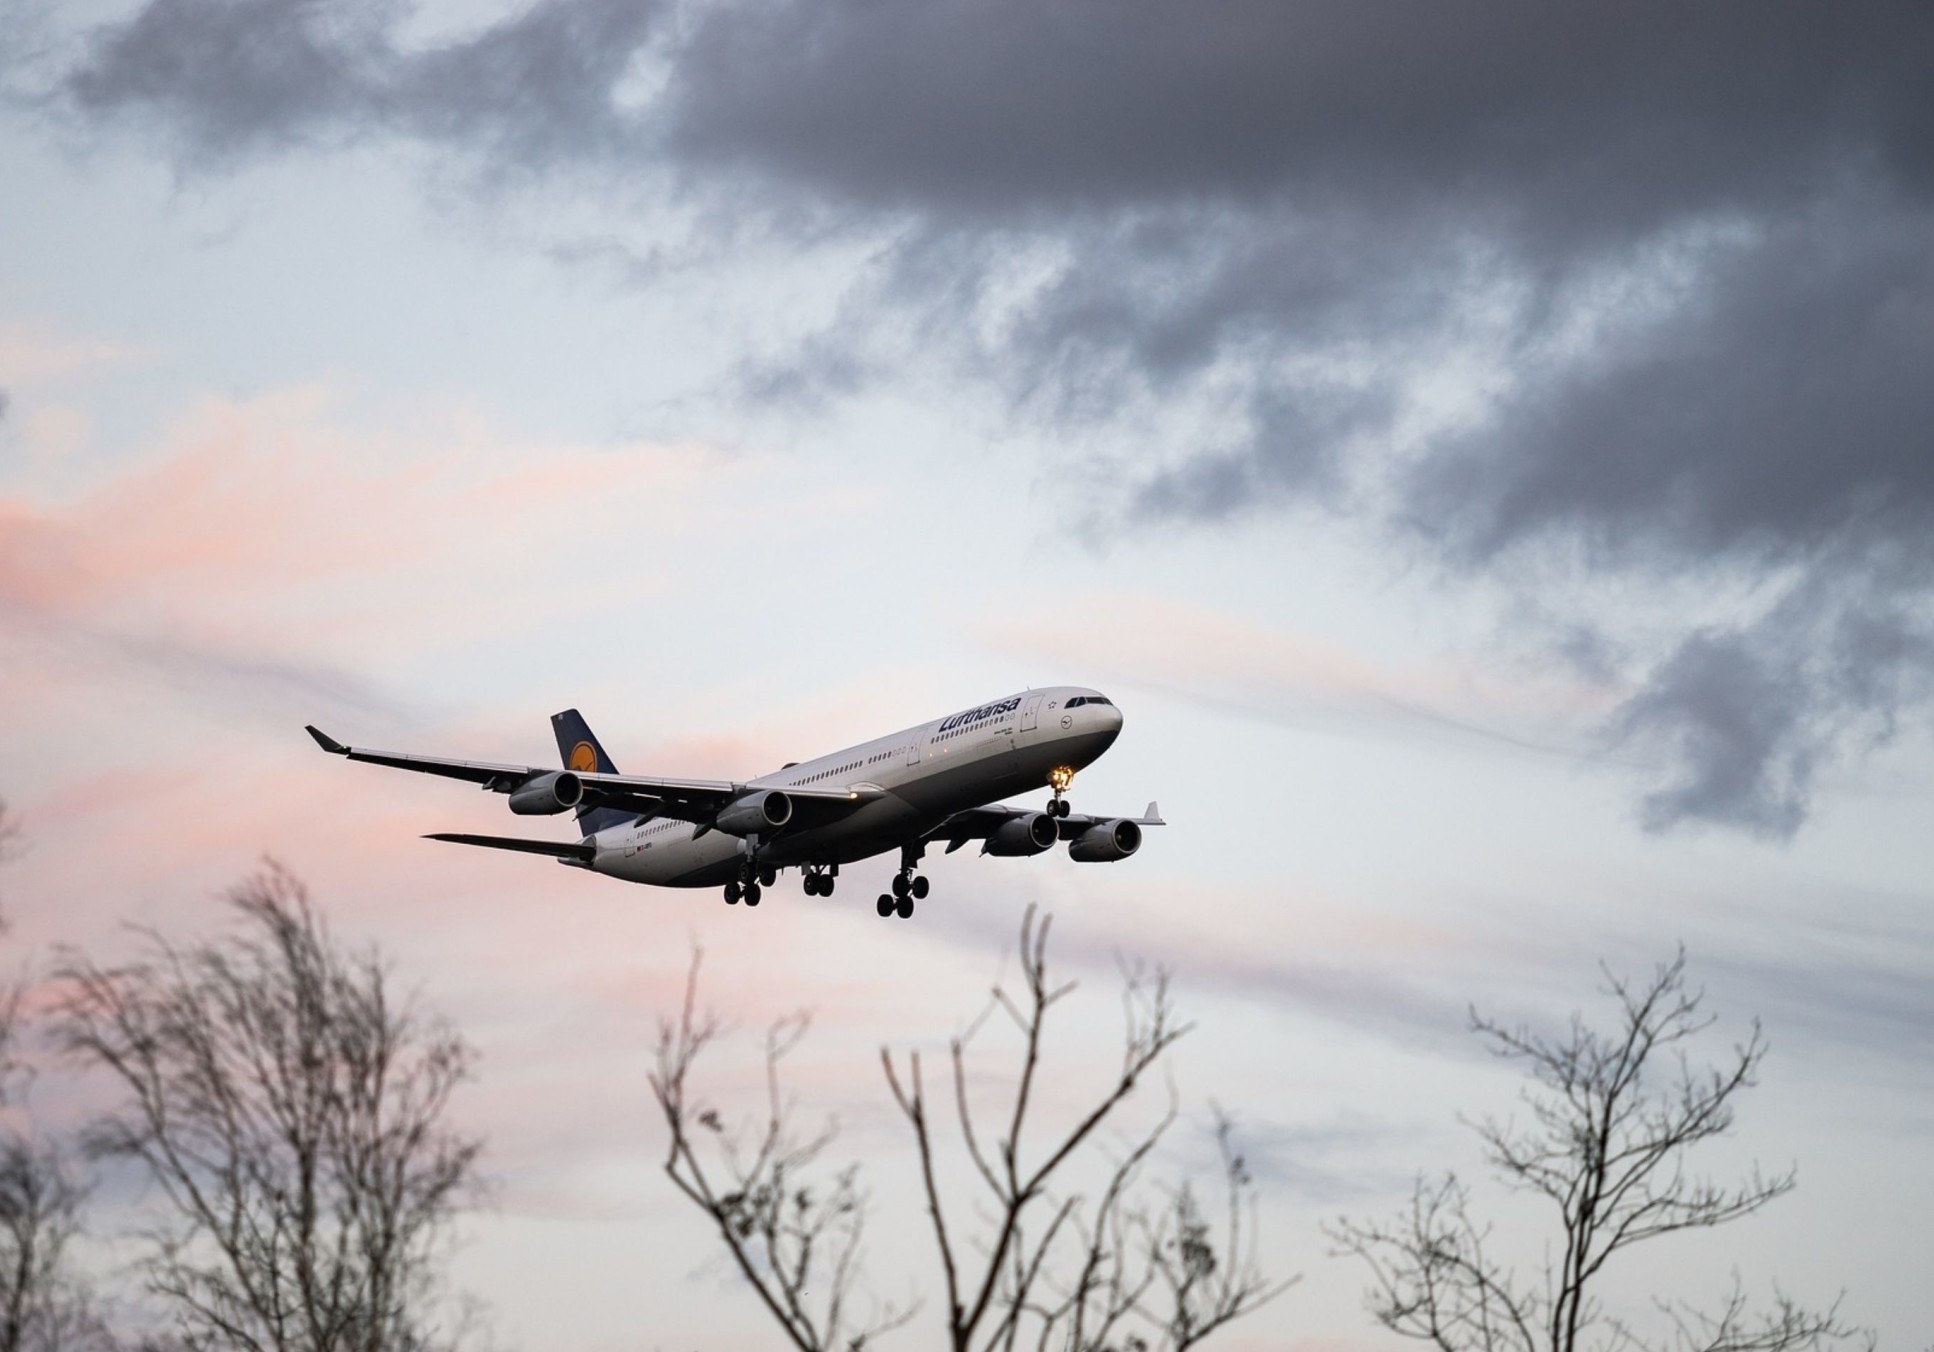 A plane coming in to land against a cloudy sky, with the silhouettes of wintry trees in the foreground